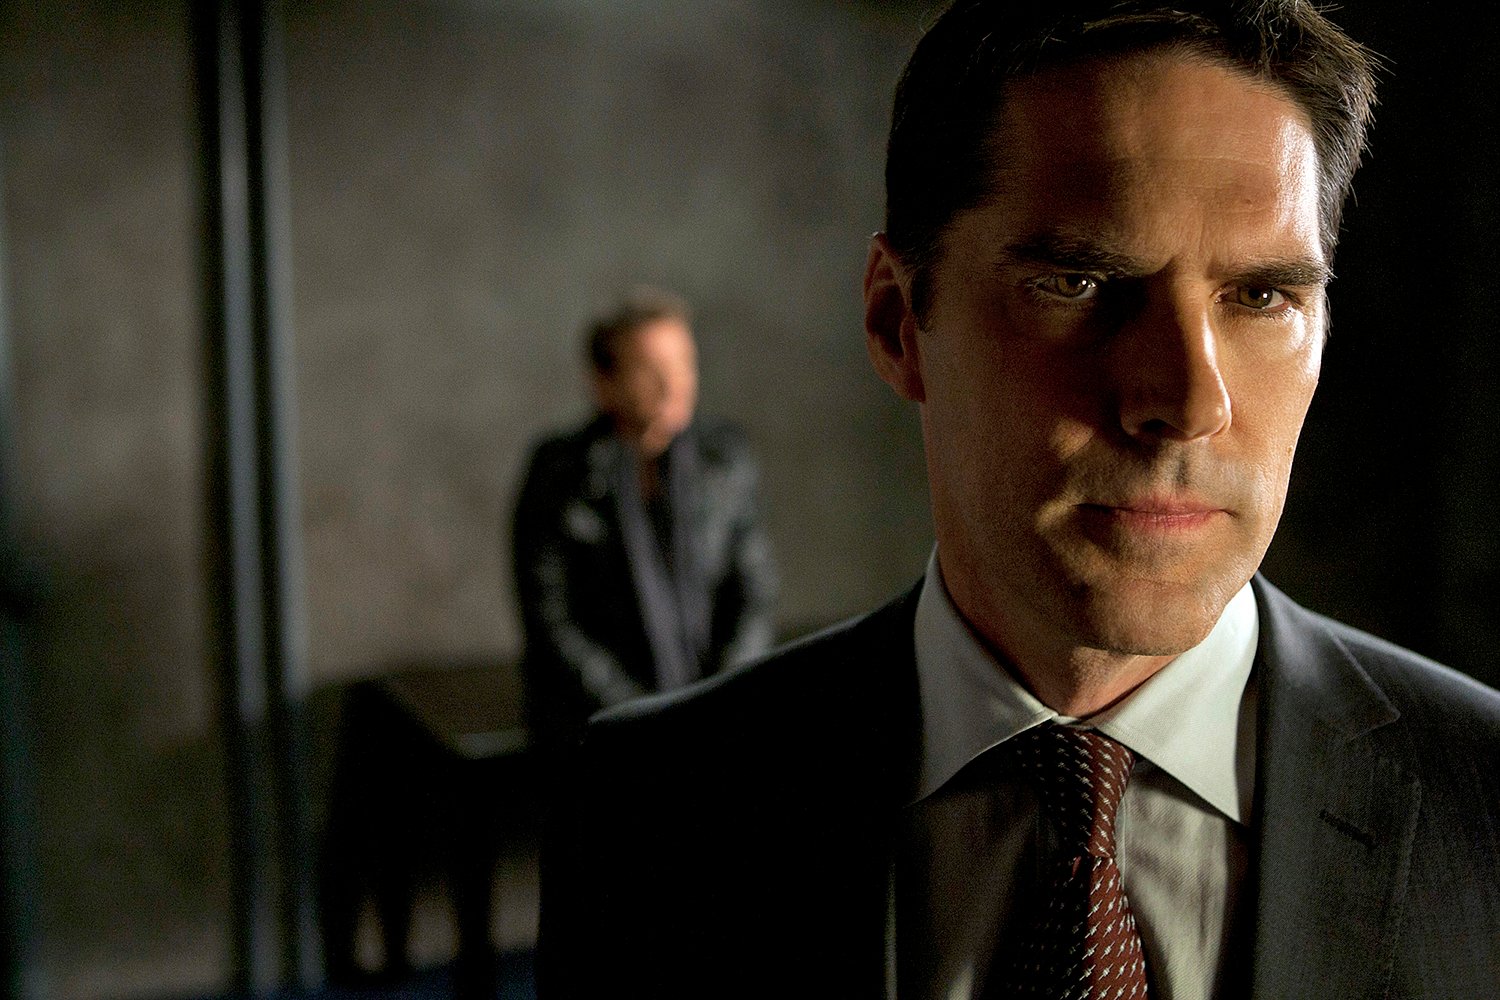 Saddest episodes of Criminal Minds: Thomas Gibson's Aaron Hotchner looks off-camera in a black suit in 'Lauren.'